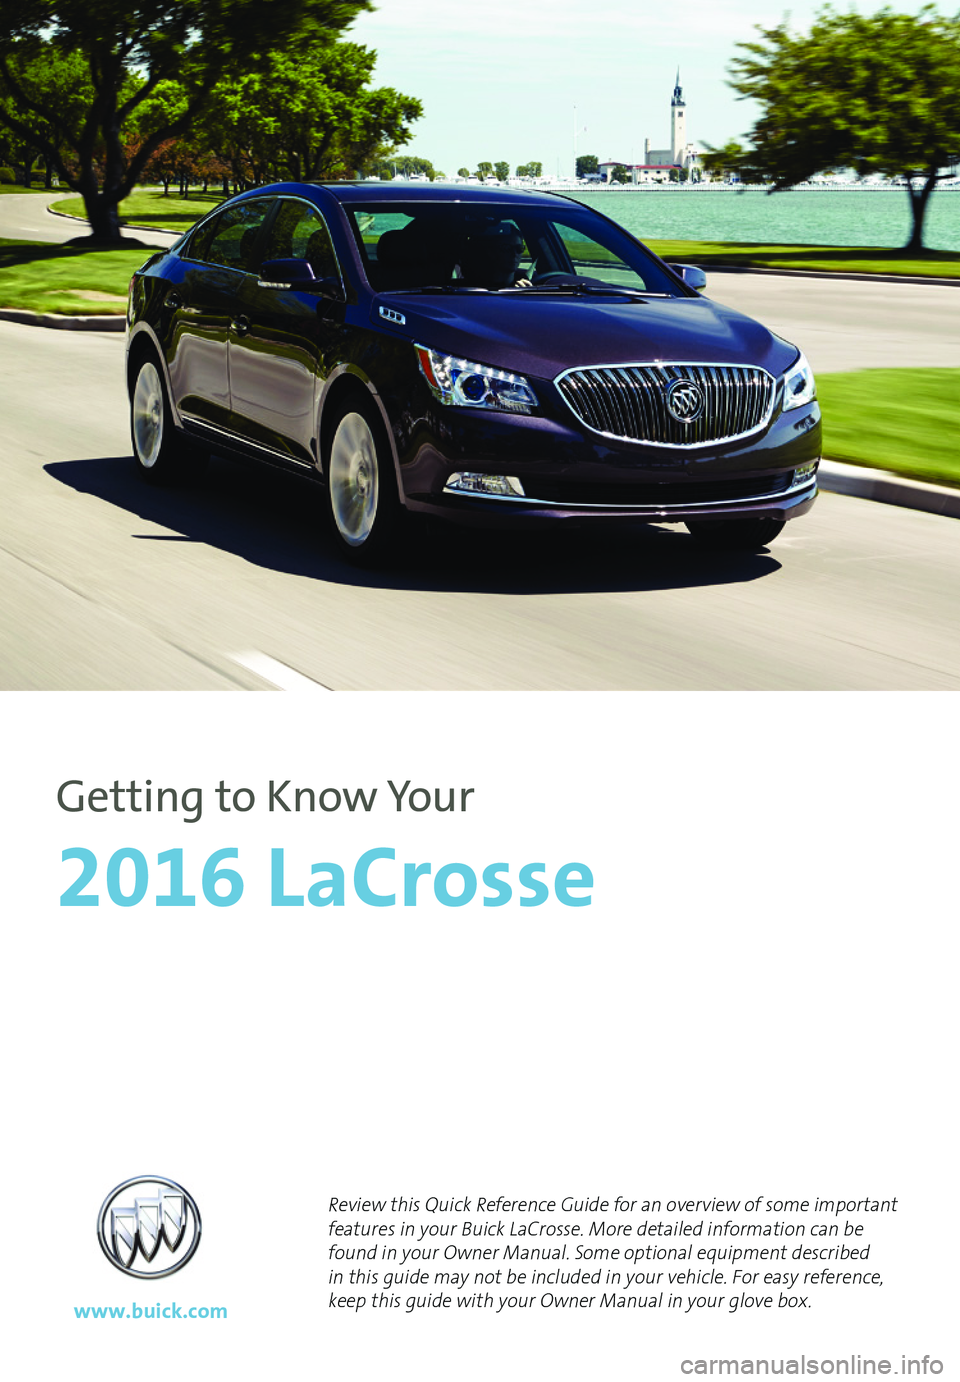 BUICK LACROSSE 2016  Get To Know Guide 1
Review this Quick Reference Guide for an overview of some important features in your Buick LaCrosse. More detailed information can be found in your Owner Manual. Some optional equipment described in